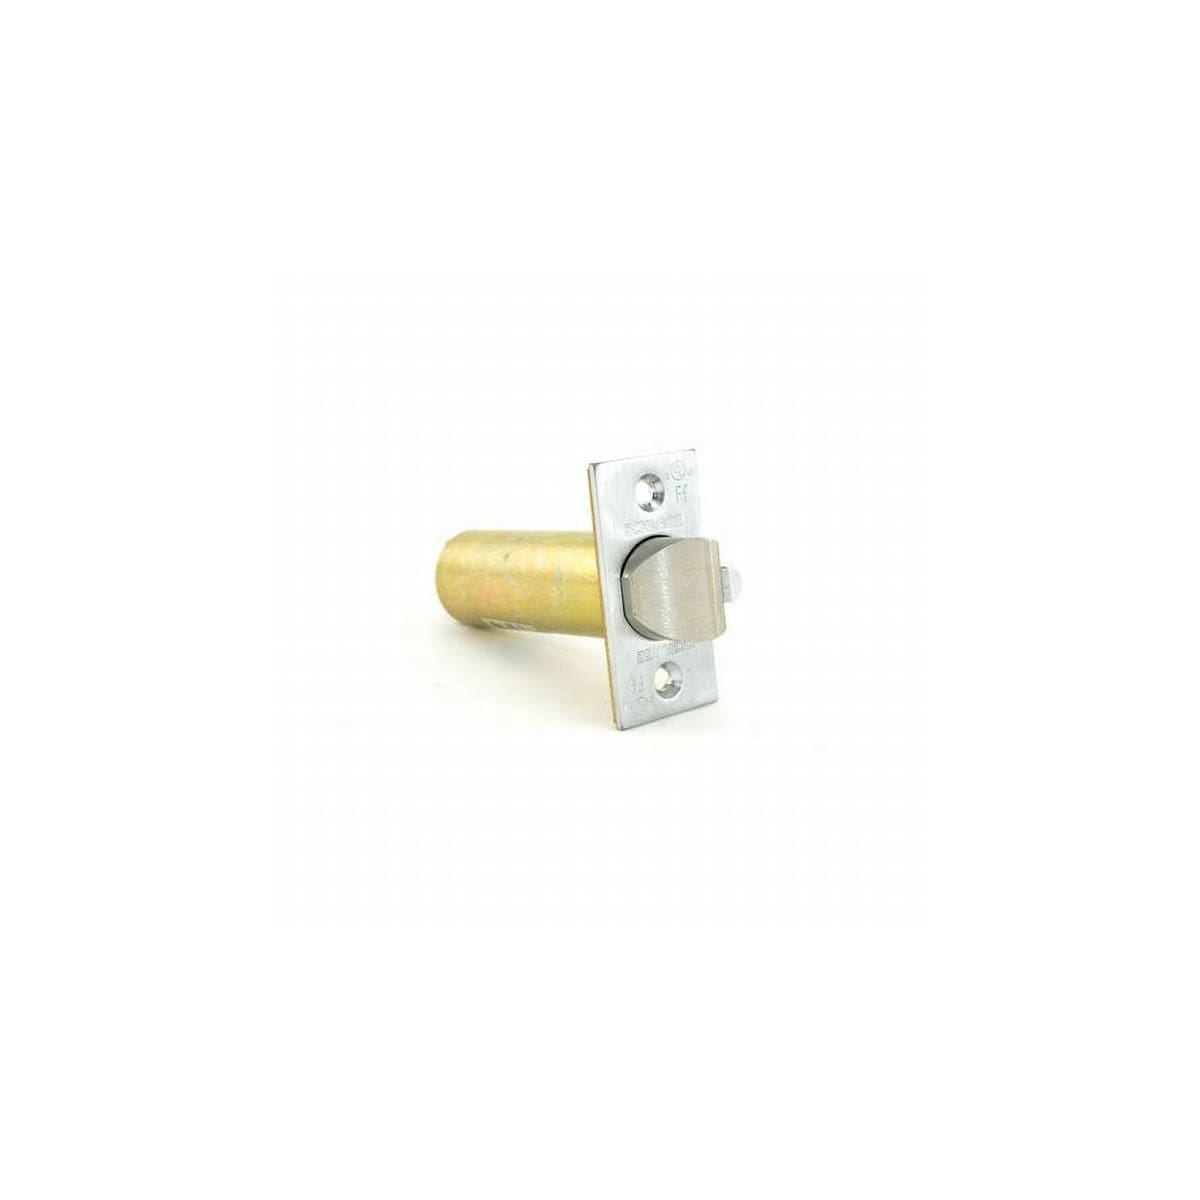 Schlage 11068605 A Series Square Corner Spring Latch with 2-3/8 Backset with 1 Face Bright Brass Finish